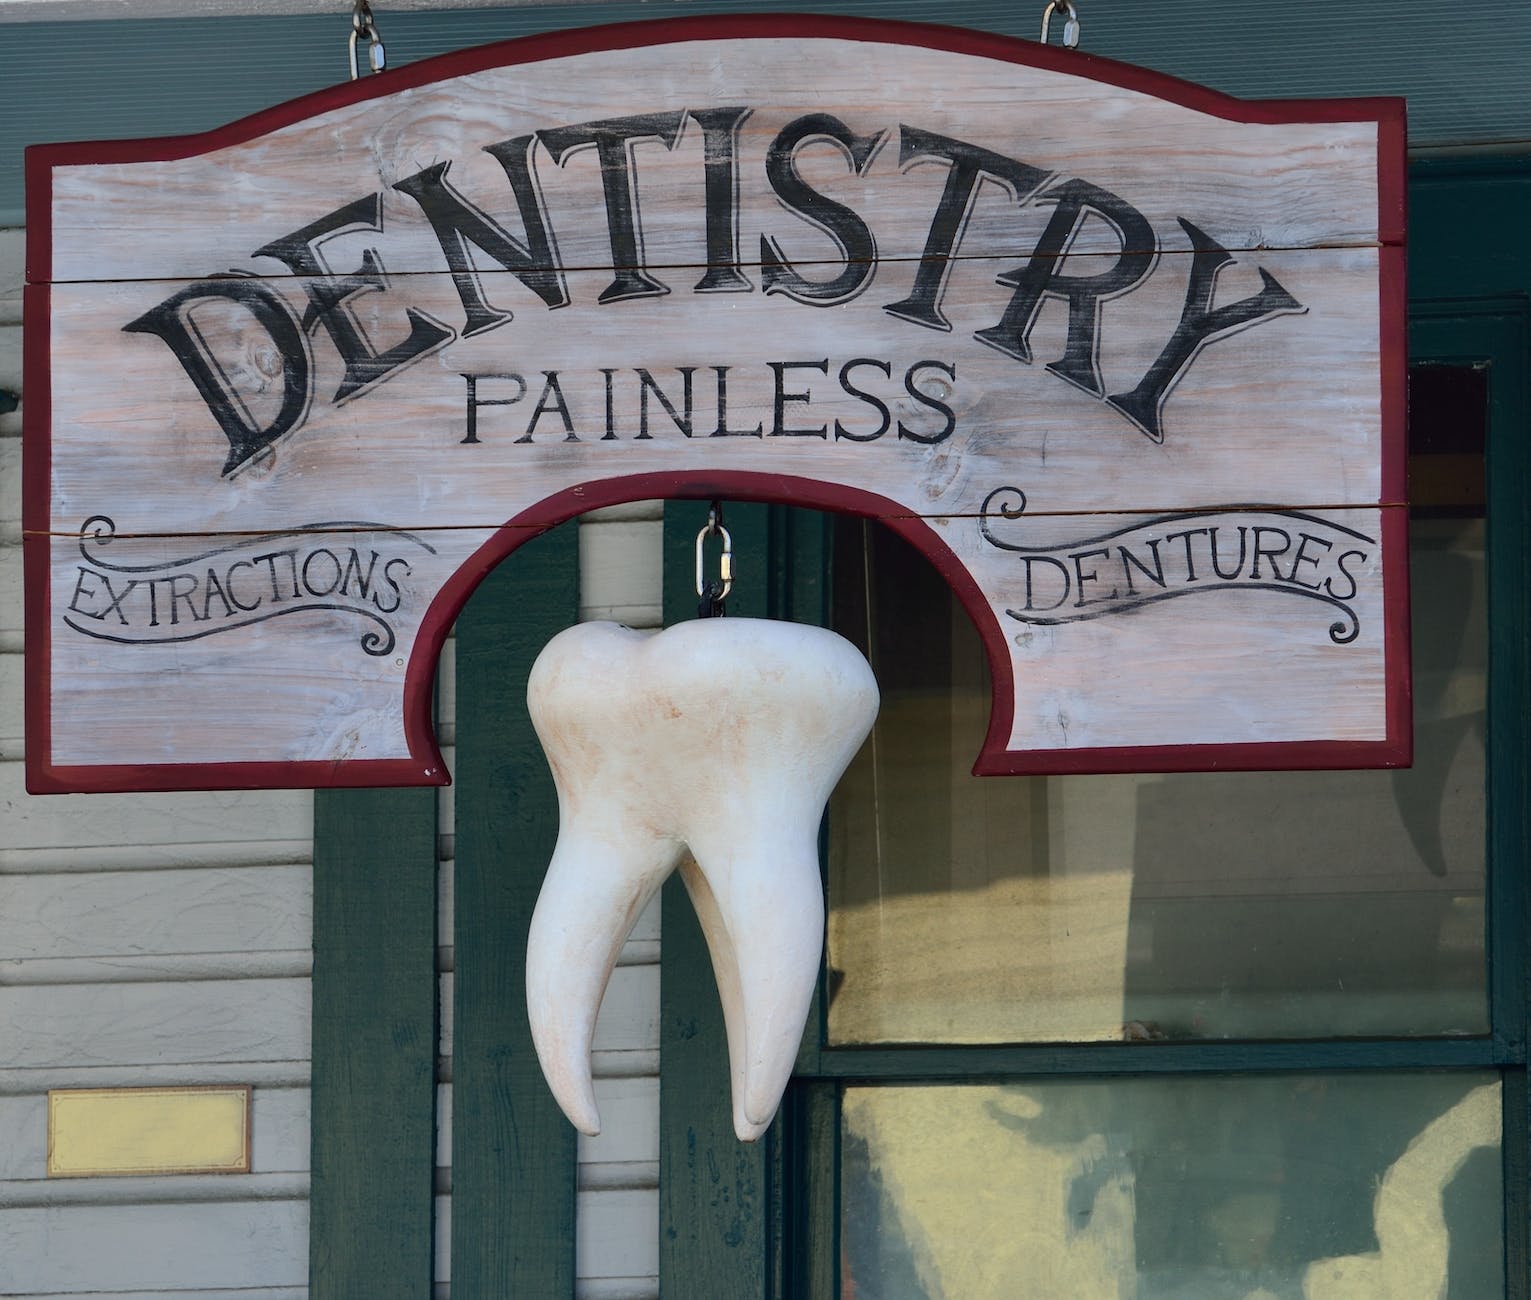 Explore Sustainable Dentistry with Dr. Amanda: 10 Eco-Friendly Ways to Make Your Smile Shine!